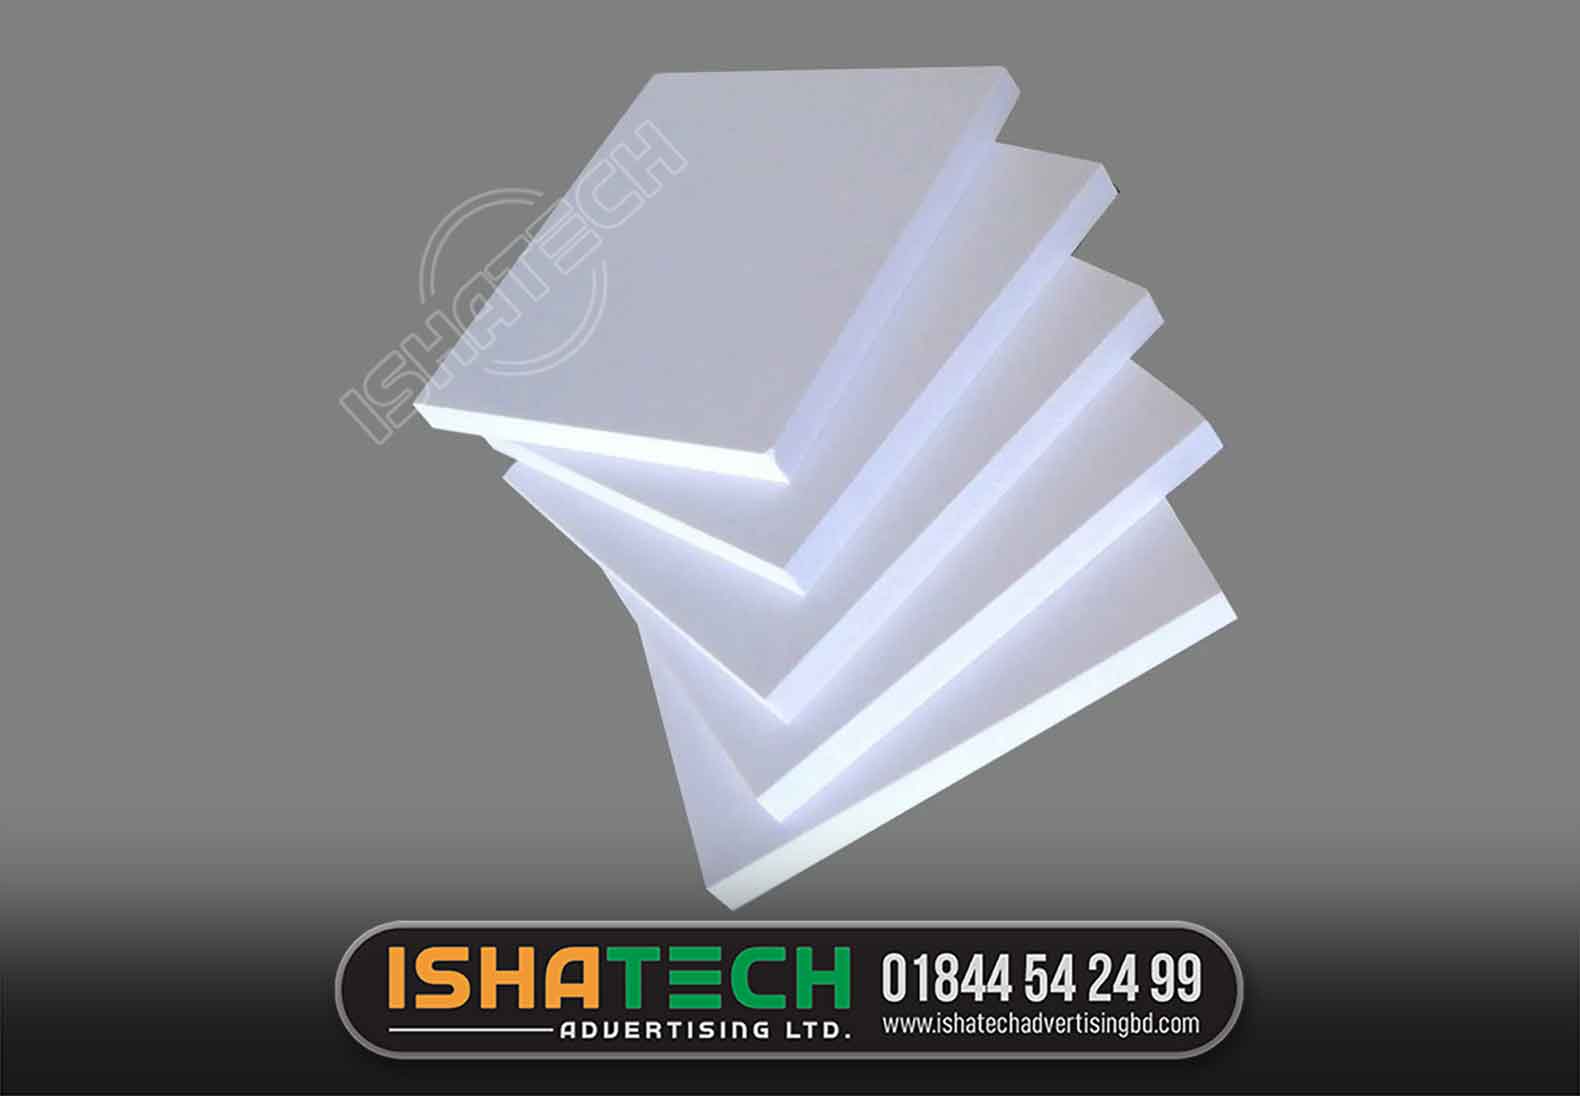 White Pvc Sunboard Sheet, Thickness: 1-2 Mm | 3mm Sunboard Sheet | White PVC Sunboard Sheet